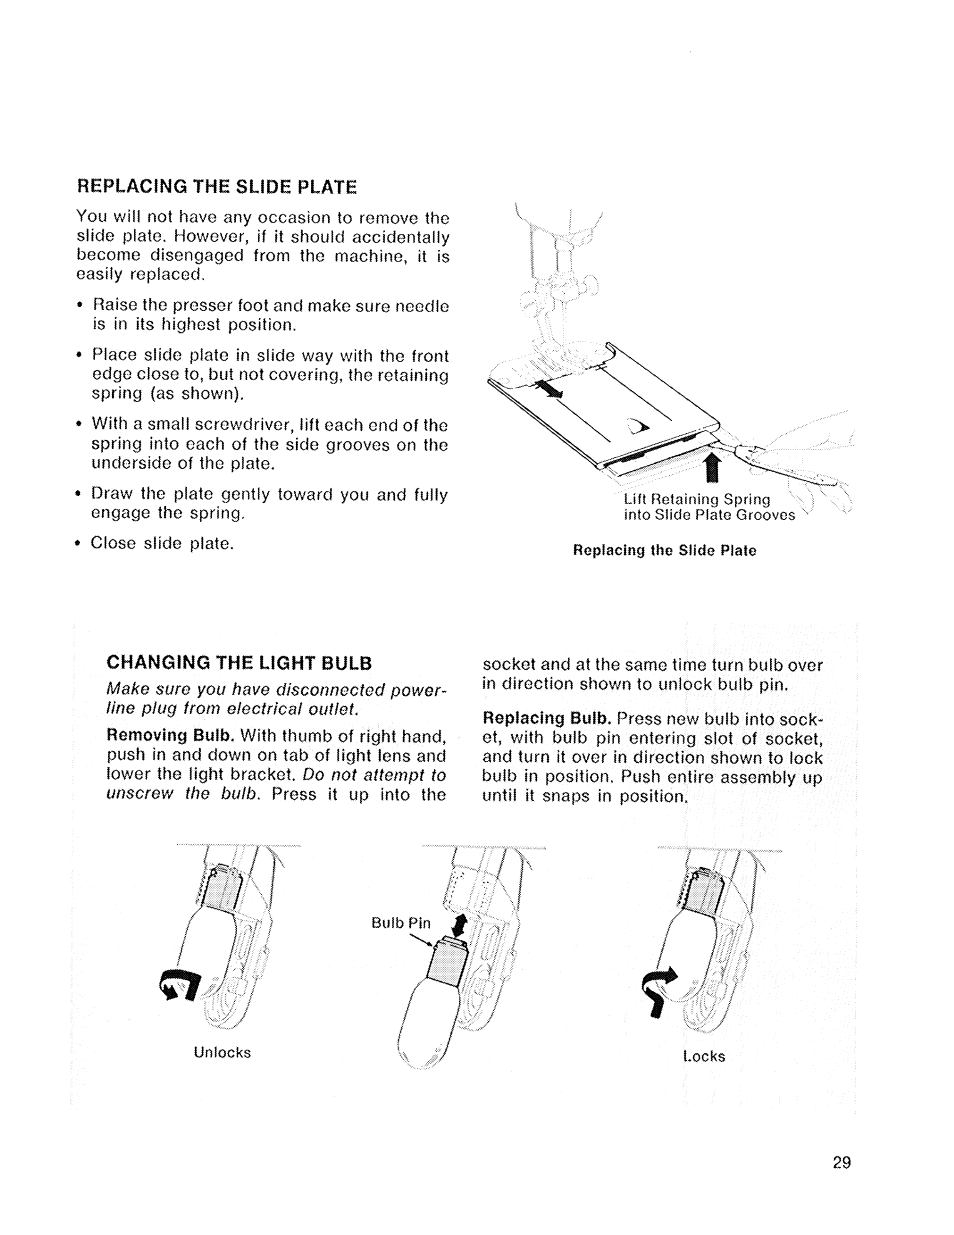 Replacing the slide plate, Changing the light bulb | SINGER 719 User Manual | Page 31 / 36